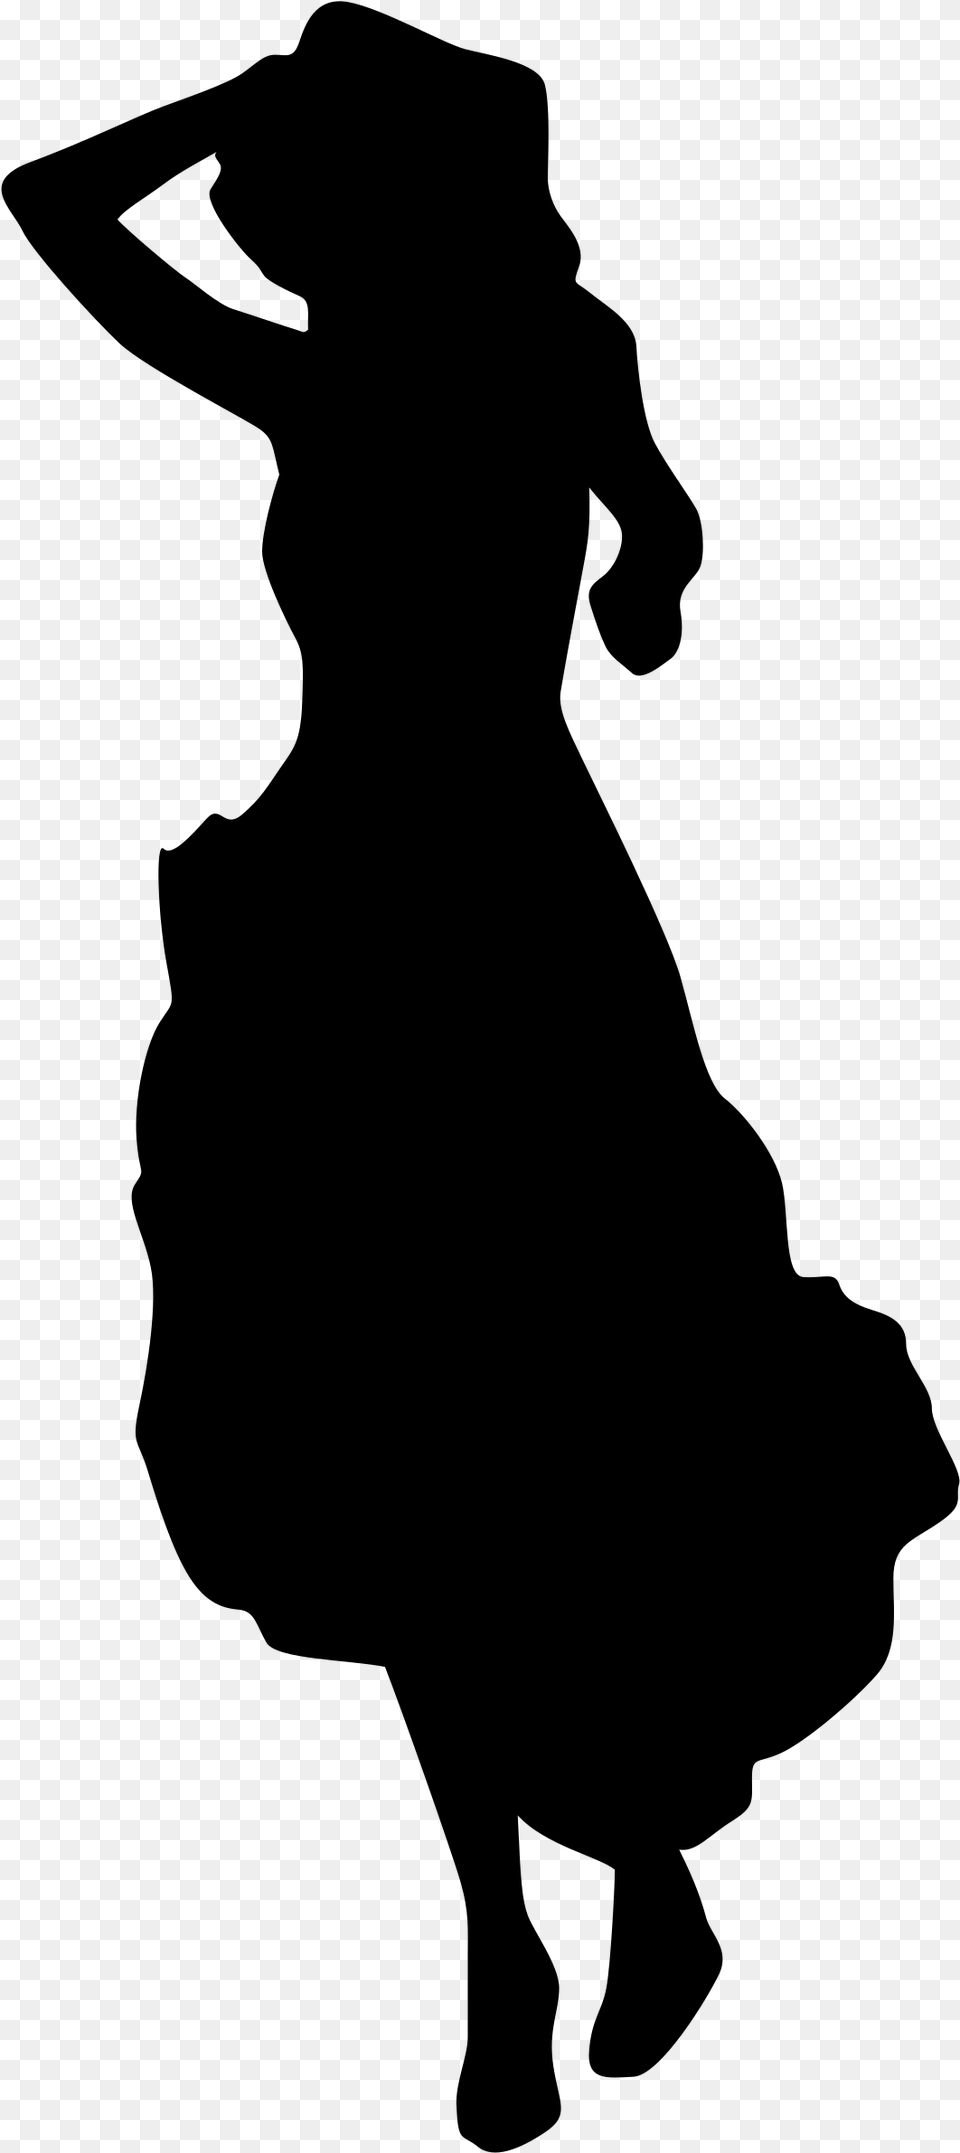 Dress Silhouette Woman Clip Art Girl In Dress Silhouette, Gray Png Image